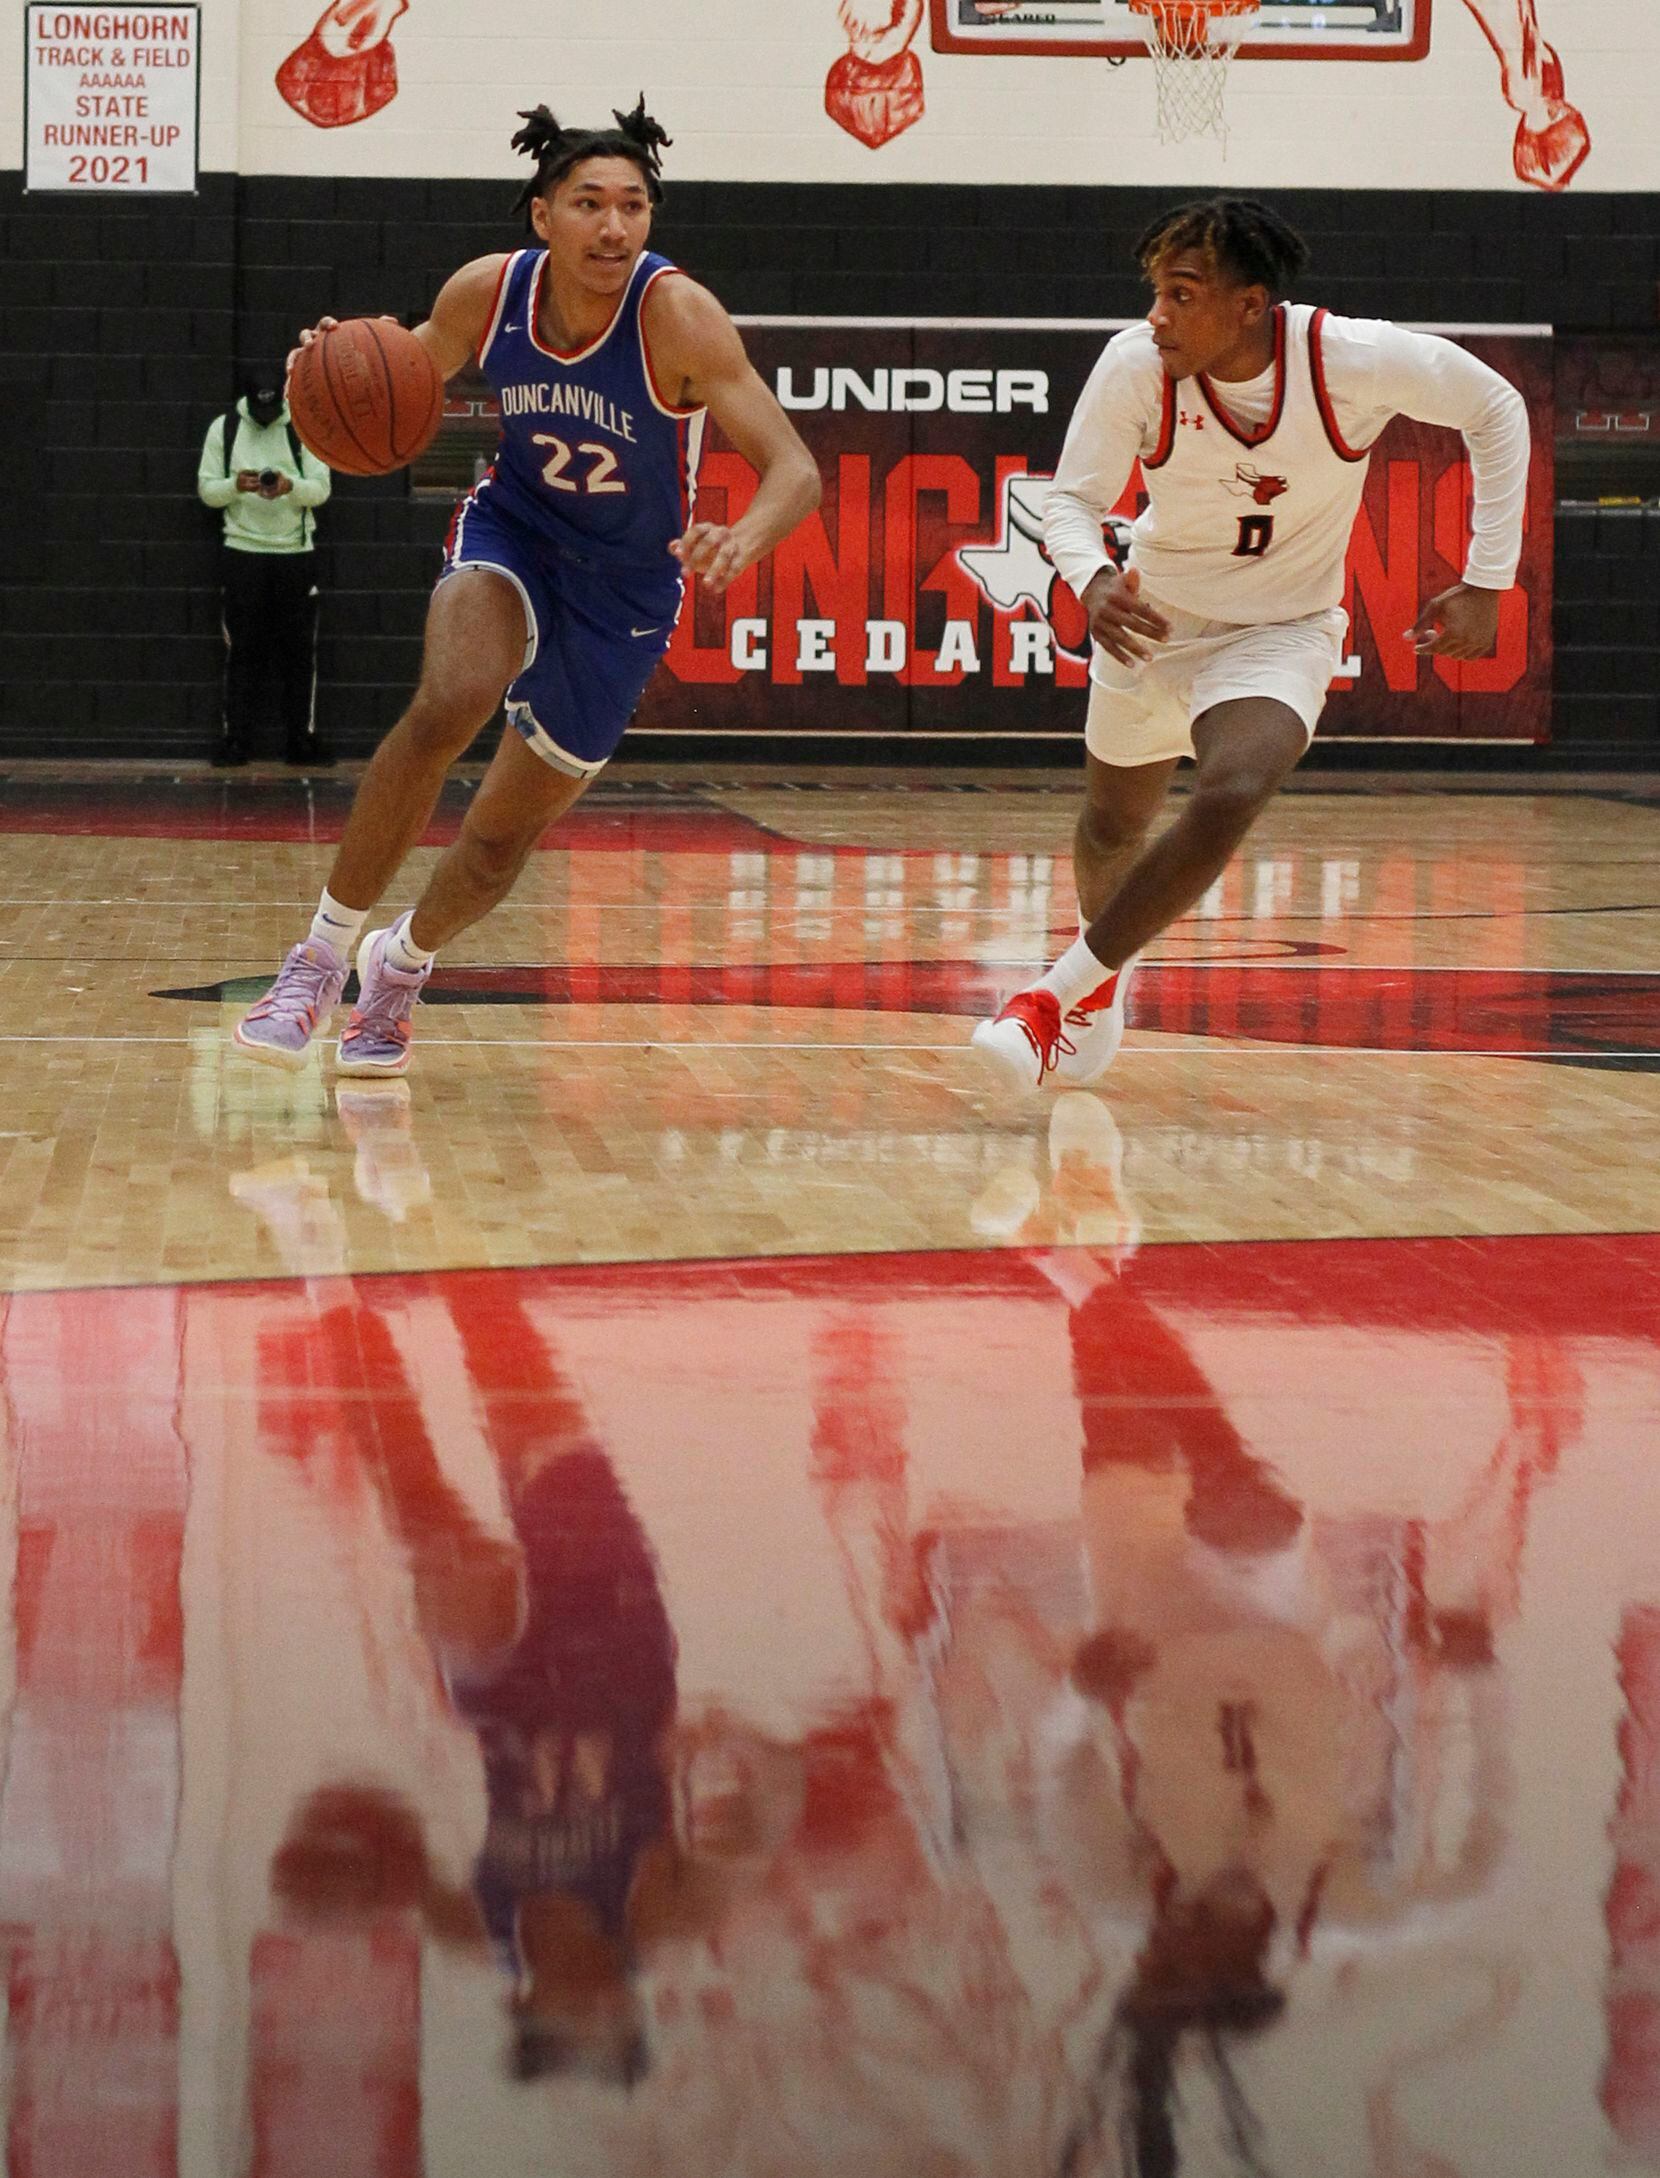 Duncanville guard Davion Sykes (22), left, drives to the basket as he is defended by Cedar Hill's Savon Price (0) during first half action. The two teams played their District 11-6A boys basketball game at Cedar Hill High School in Cedar Hill on January 14, 2022. (Steve Hamm/ Special Contributor)